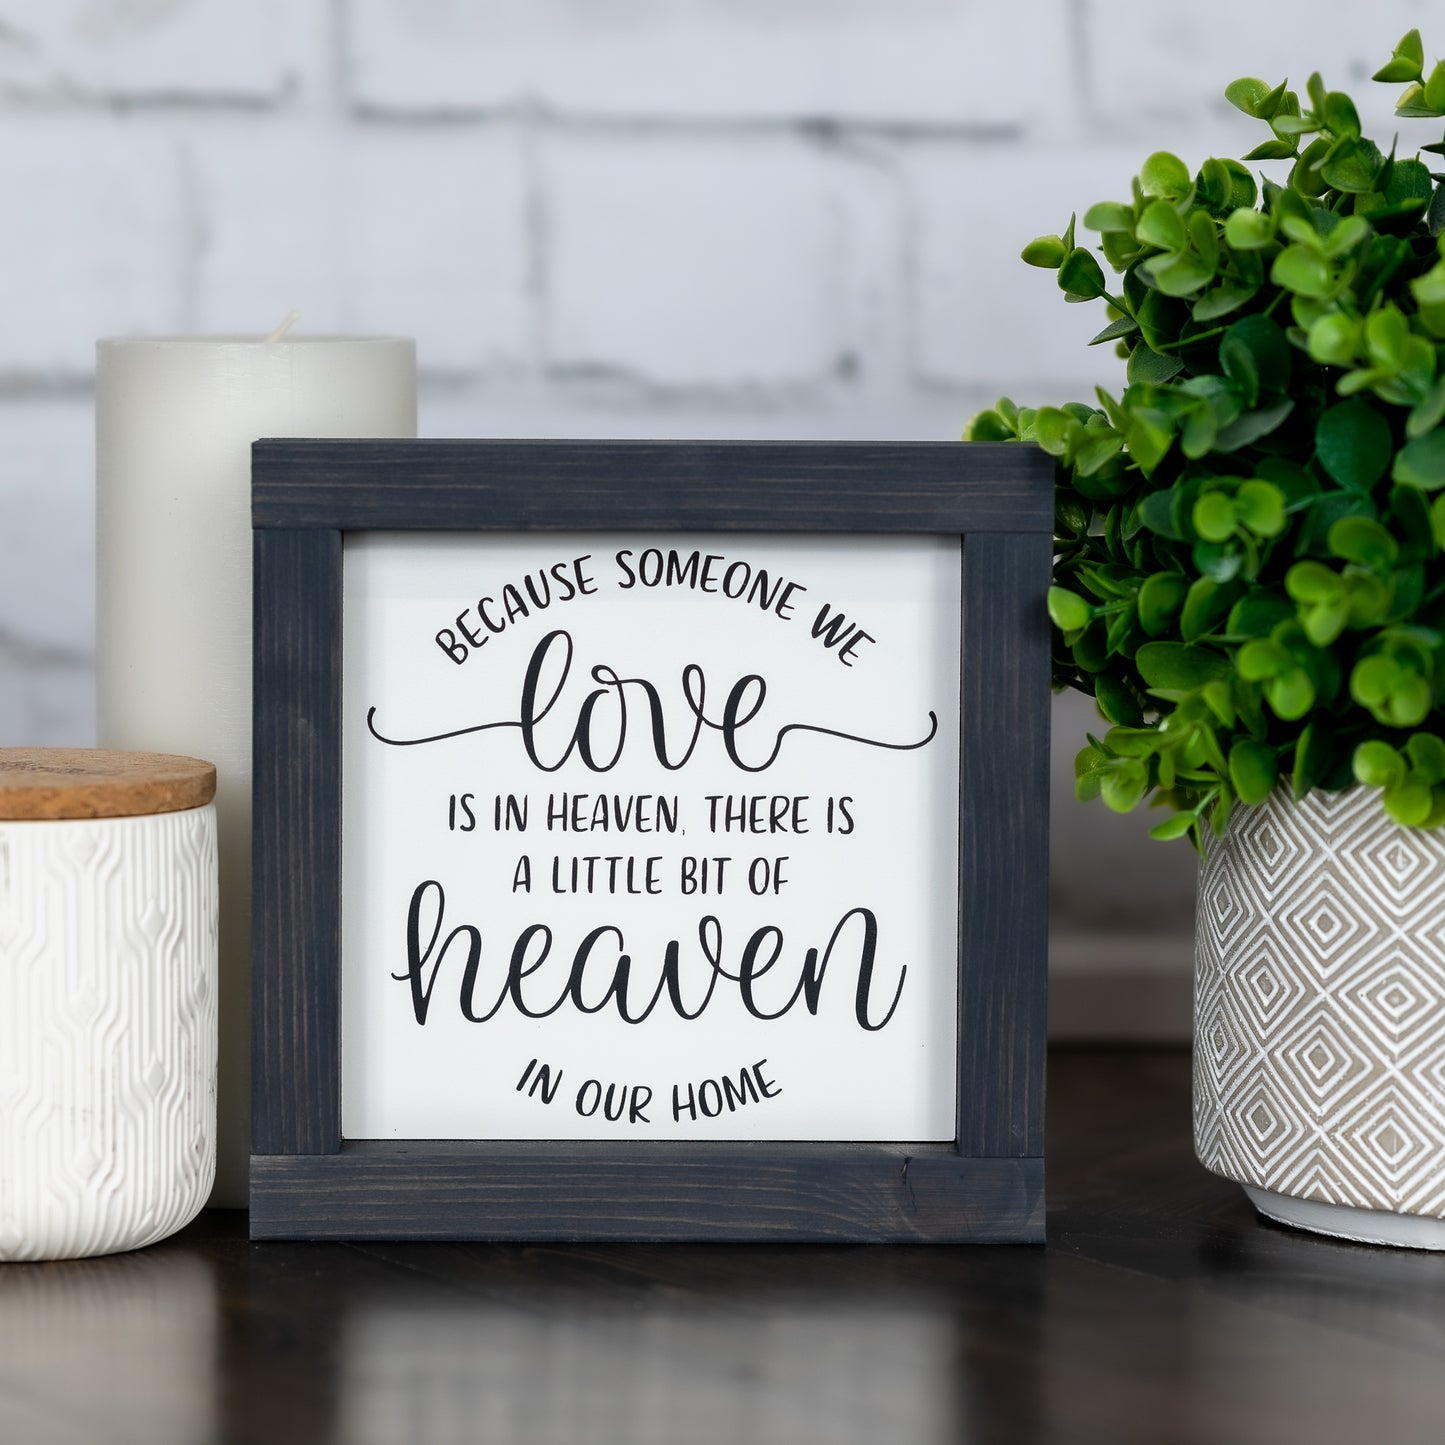 because someone we love is in heaven, there is a little bit of heaven in our home ~ wood sign